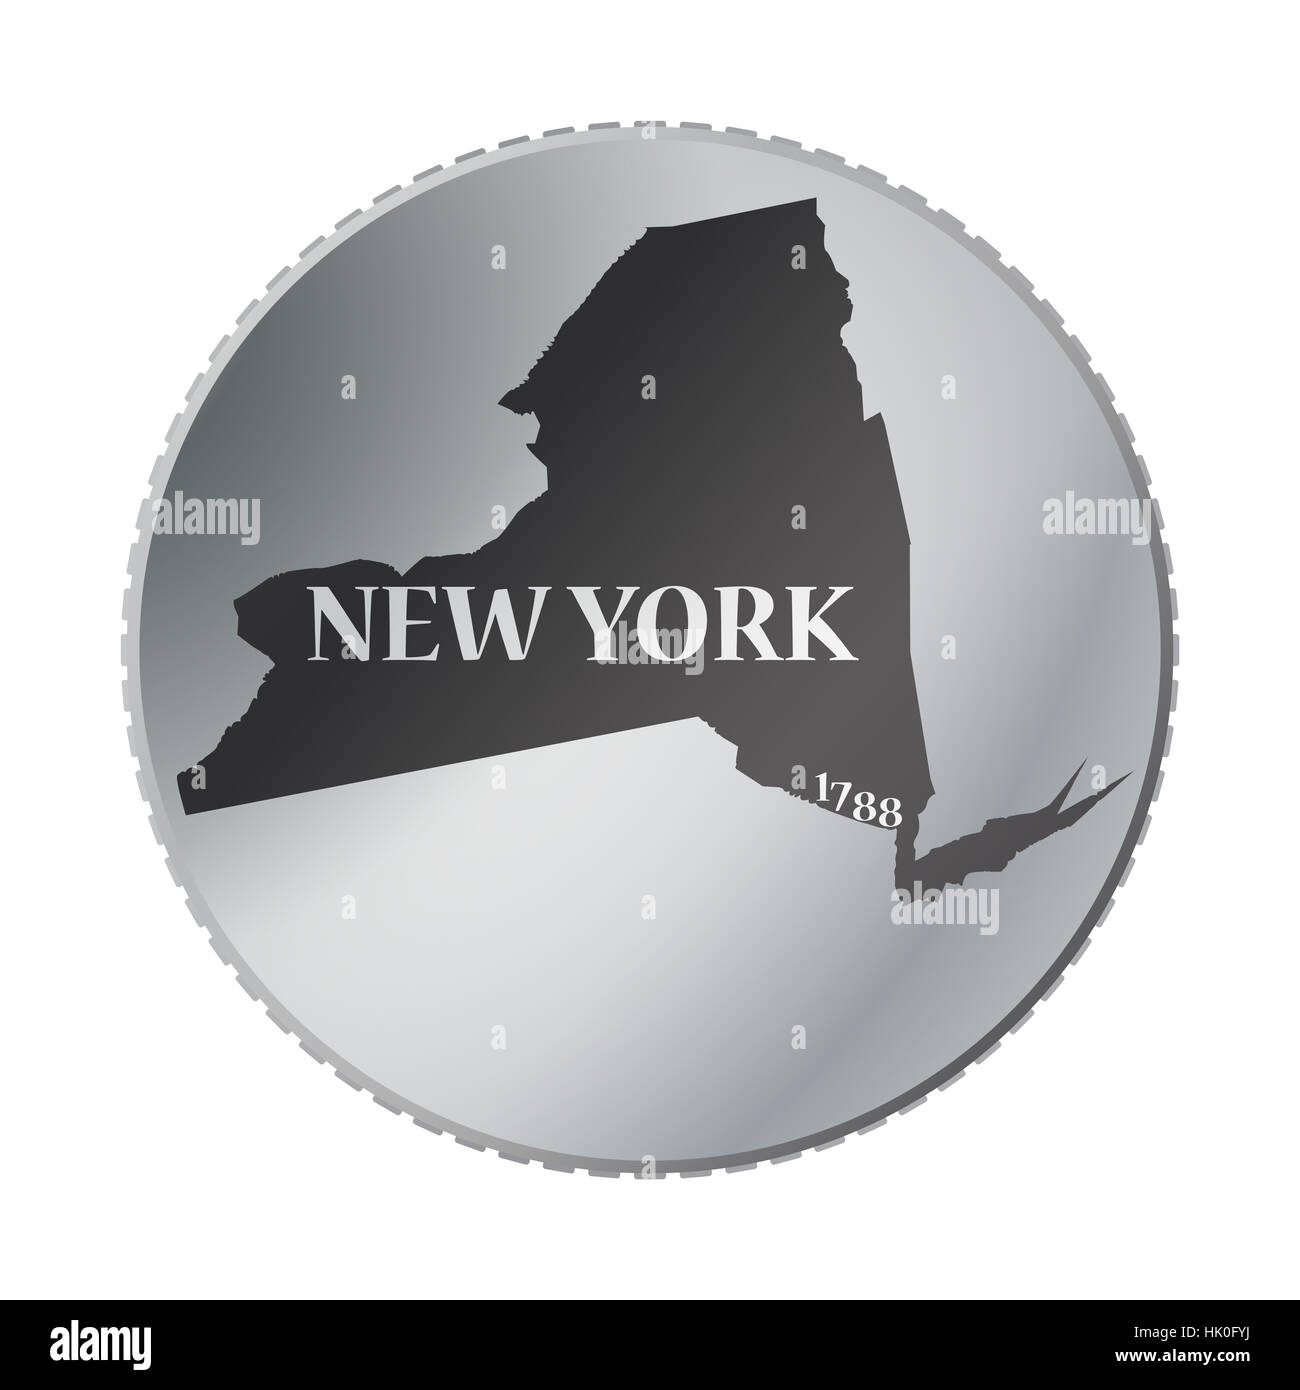 A New York state coin isolated on a white background Stock Photo